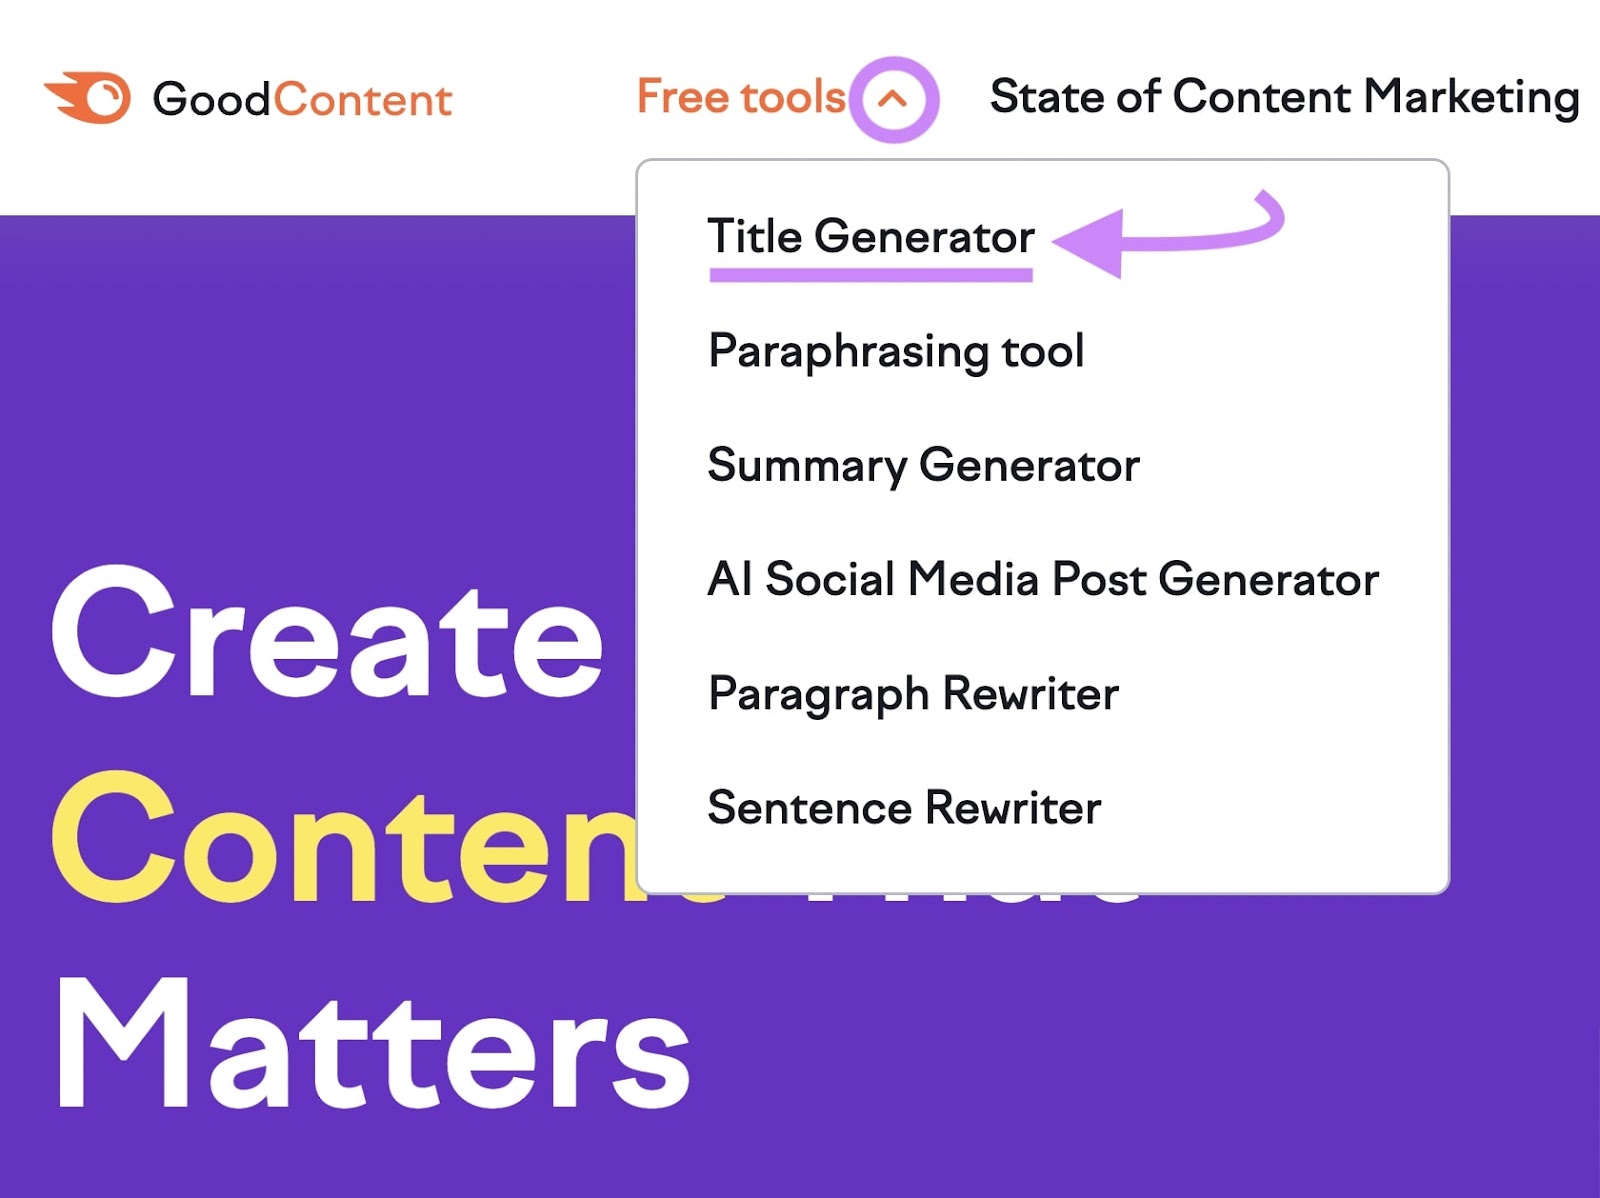 "Title Generator" selected from the "Free tools" drop-down menu on Google Content Hub